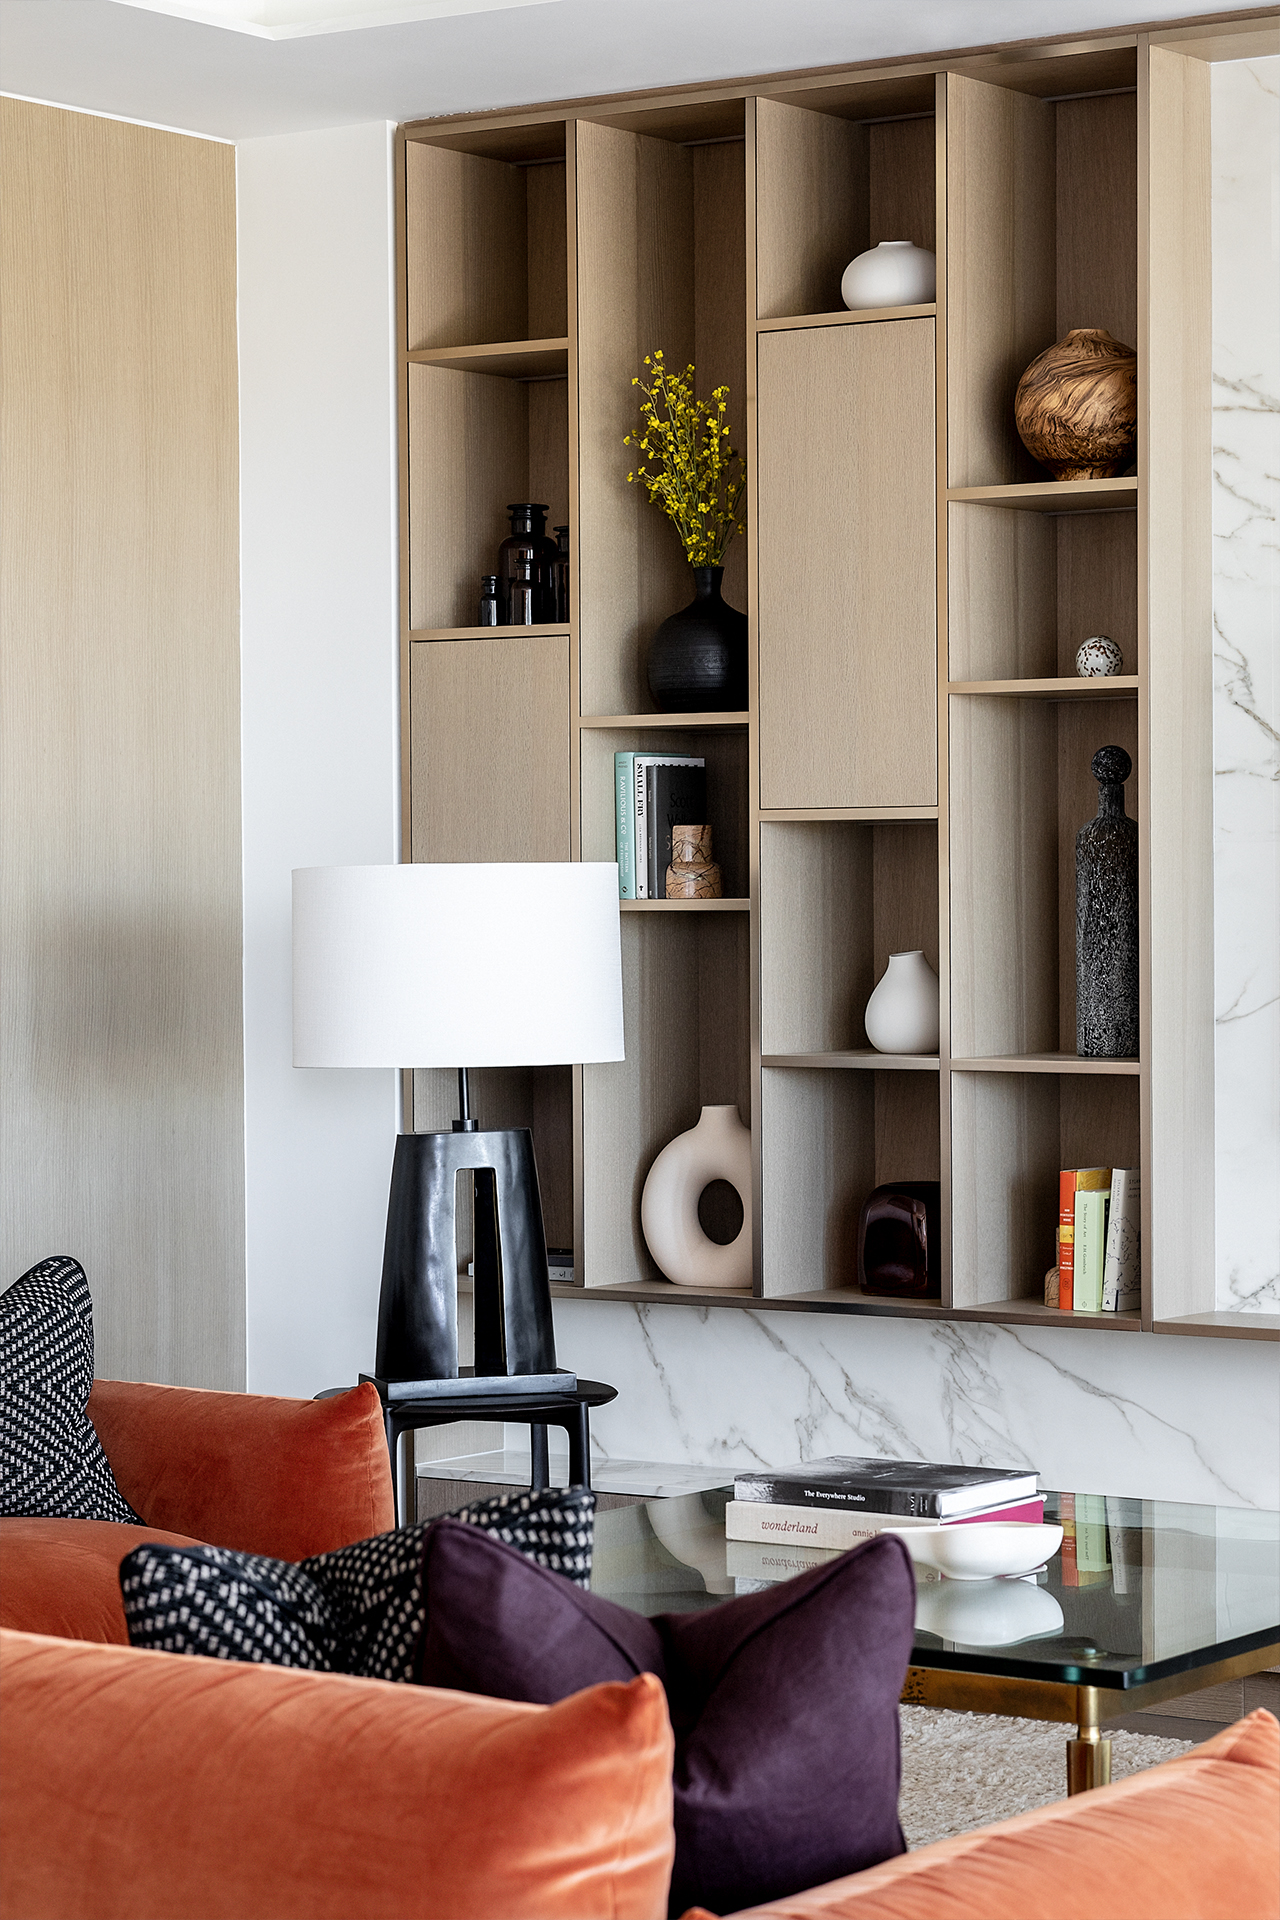 One St. John's Wood | Wooden shelving, velvet sofa and contemporary ornaments | Angel O'Donnell